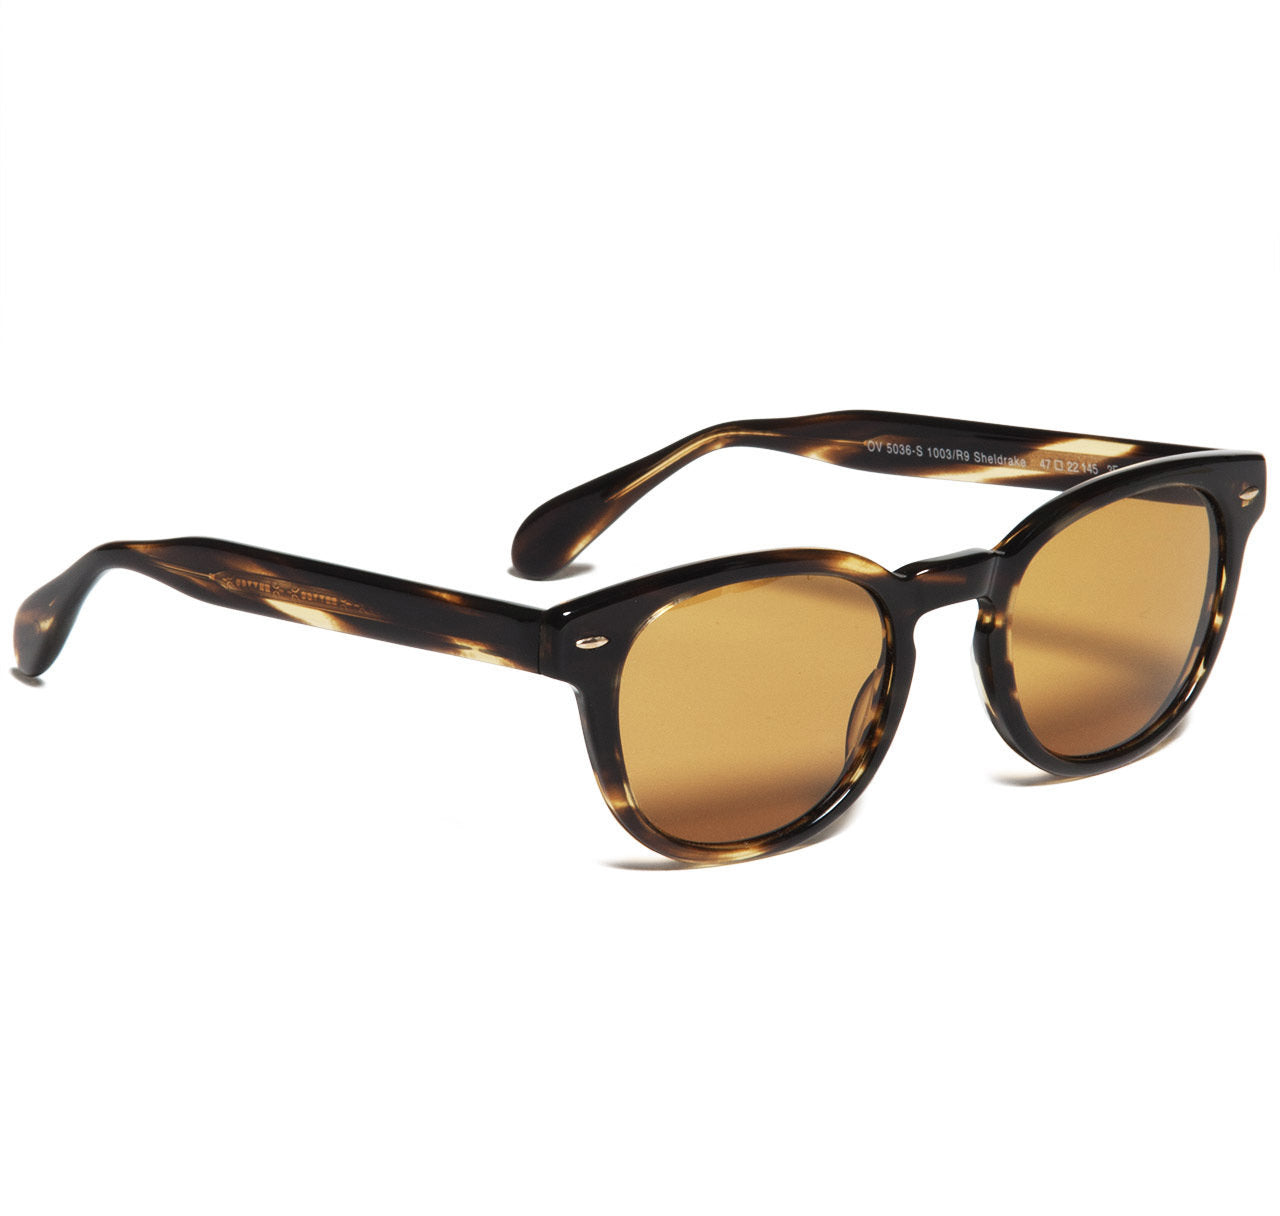 Oliver Peoples Sheldrake Cocobolo with Champagne Photochromic Vintage Glass